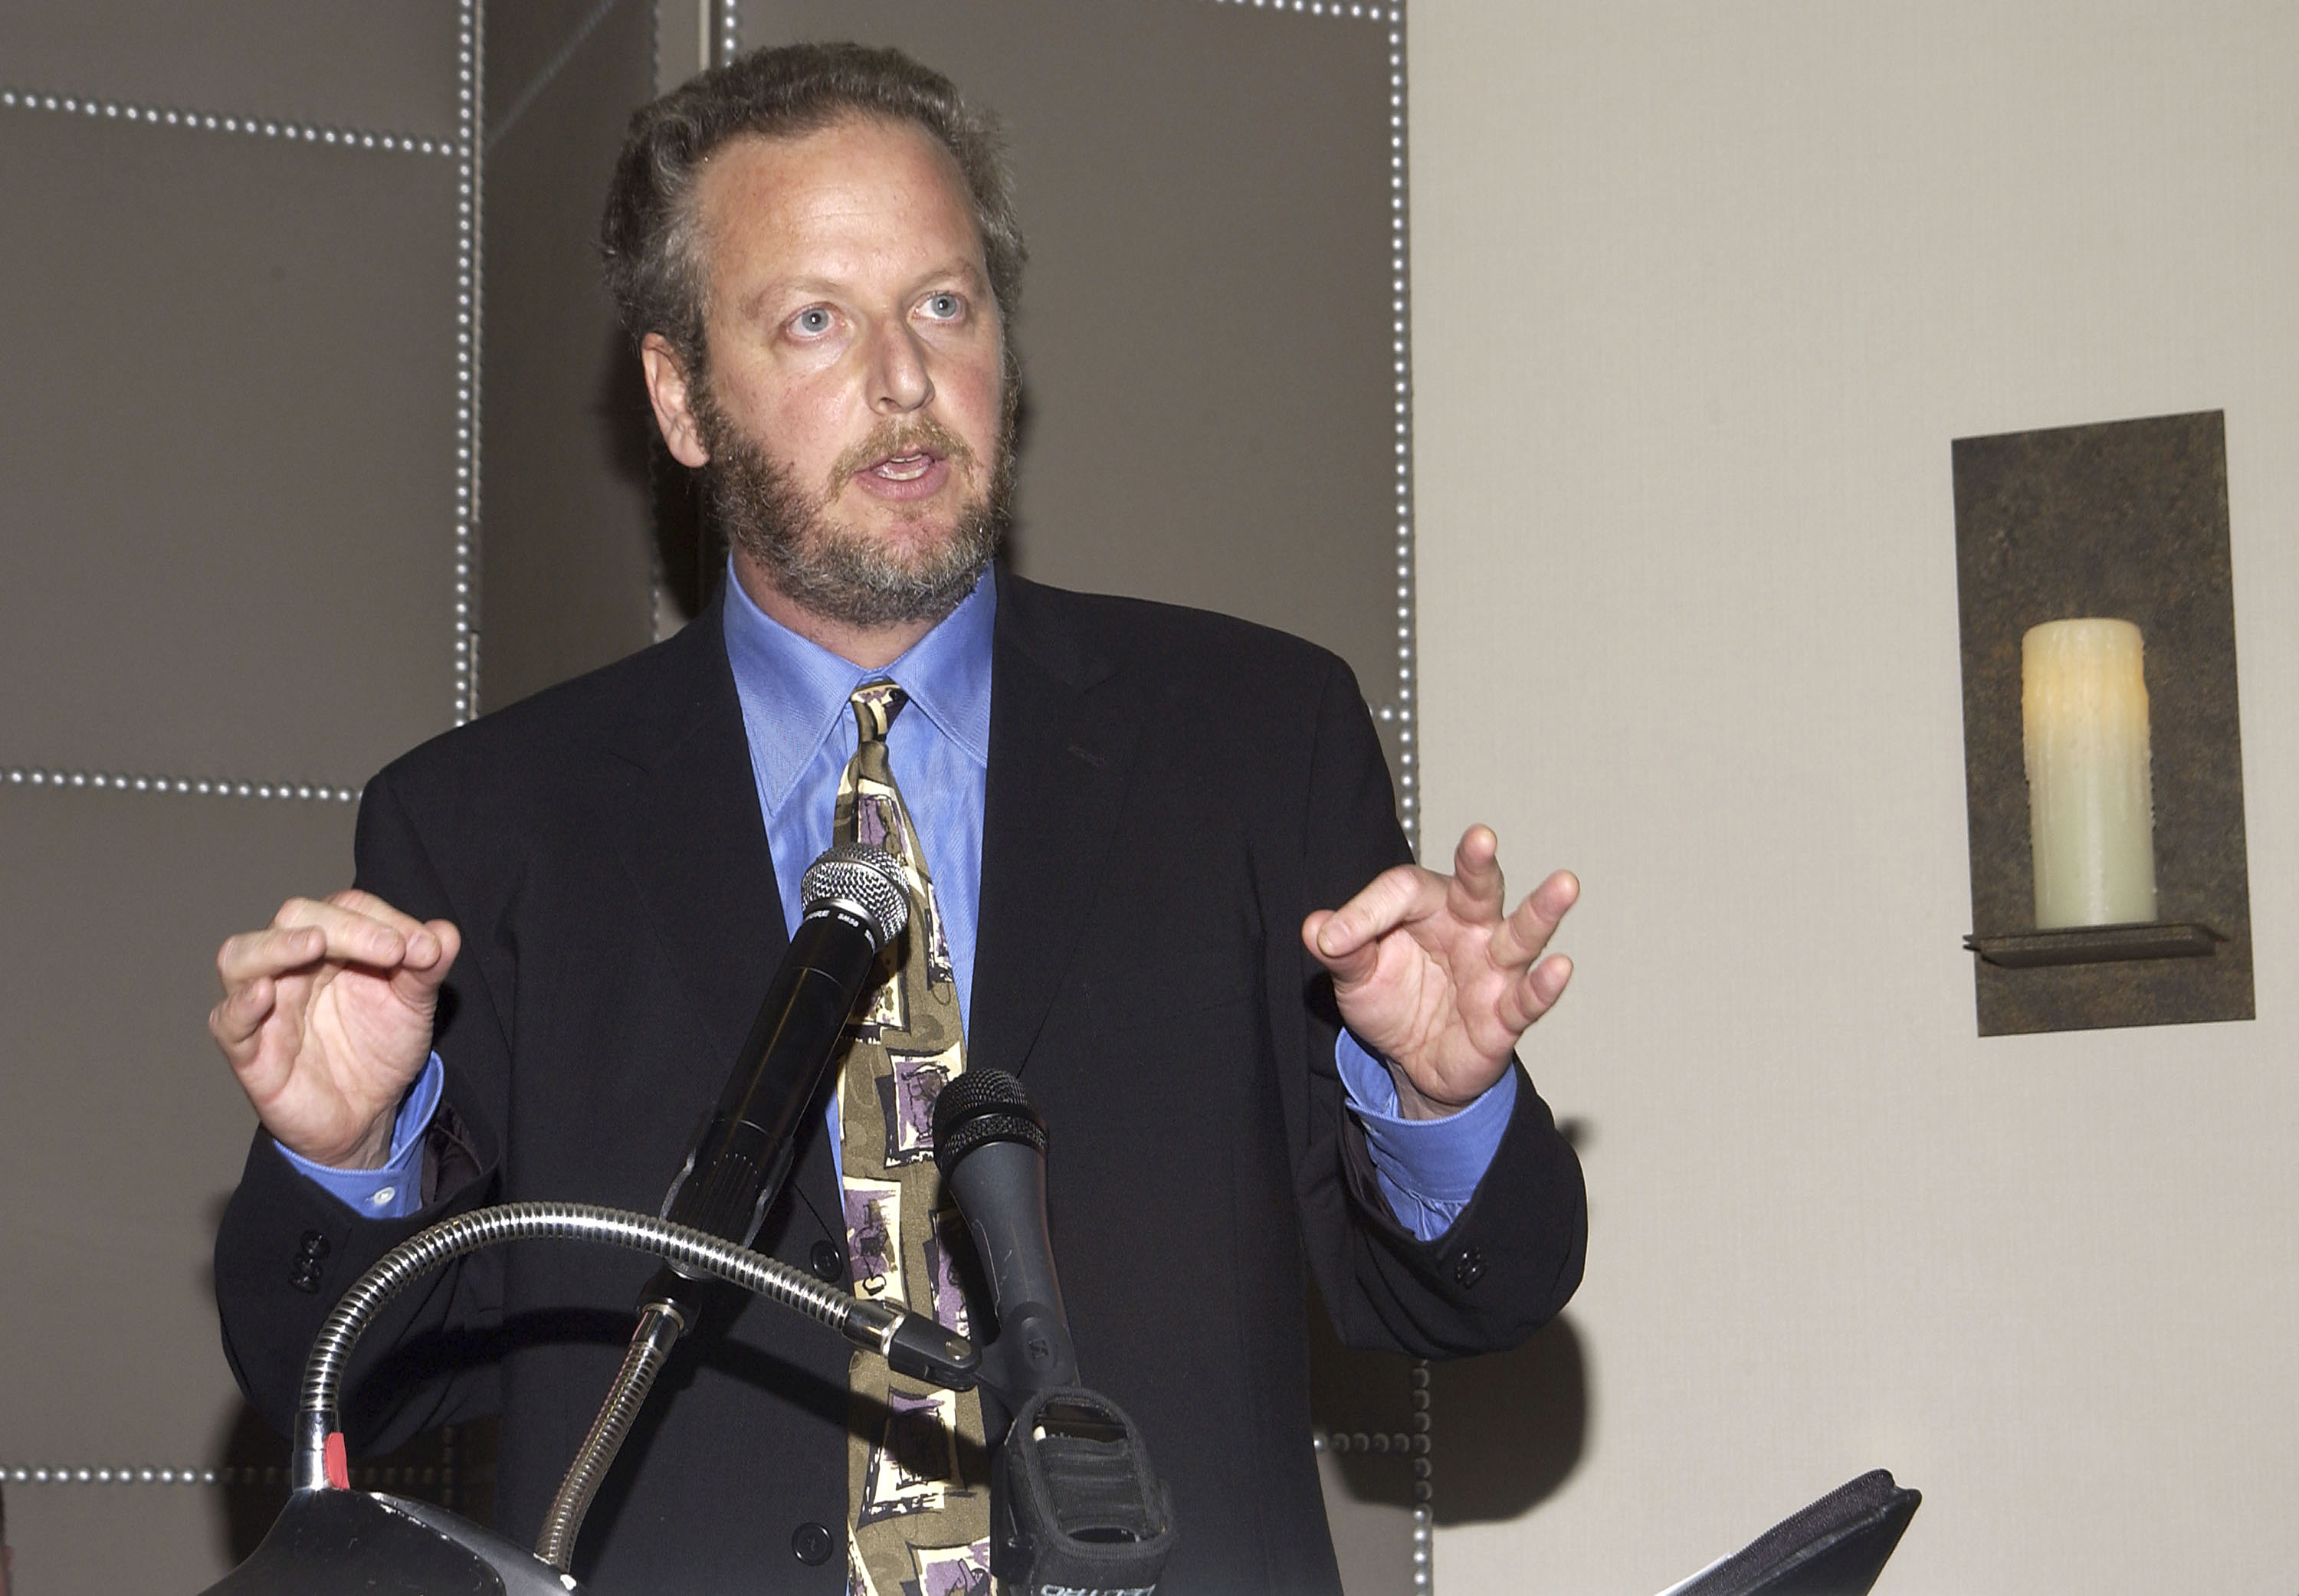 Daniel Stern speaking at the Creative Coalition Spotlight Awards in Los Angeles, California on December 7, 2004 | Source: Getty Images